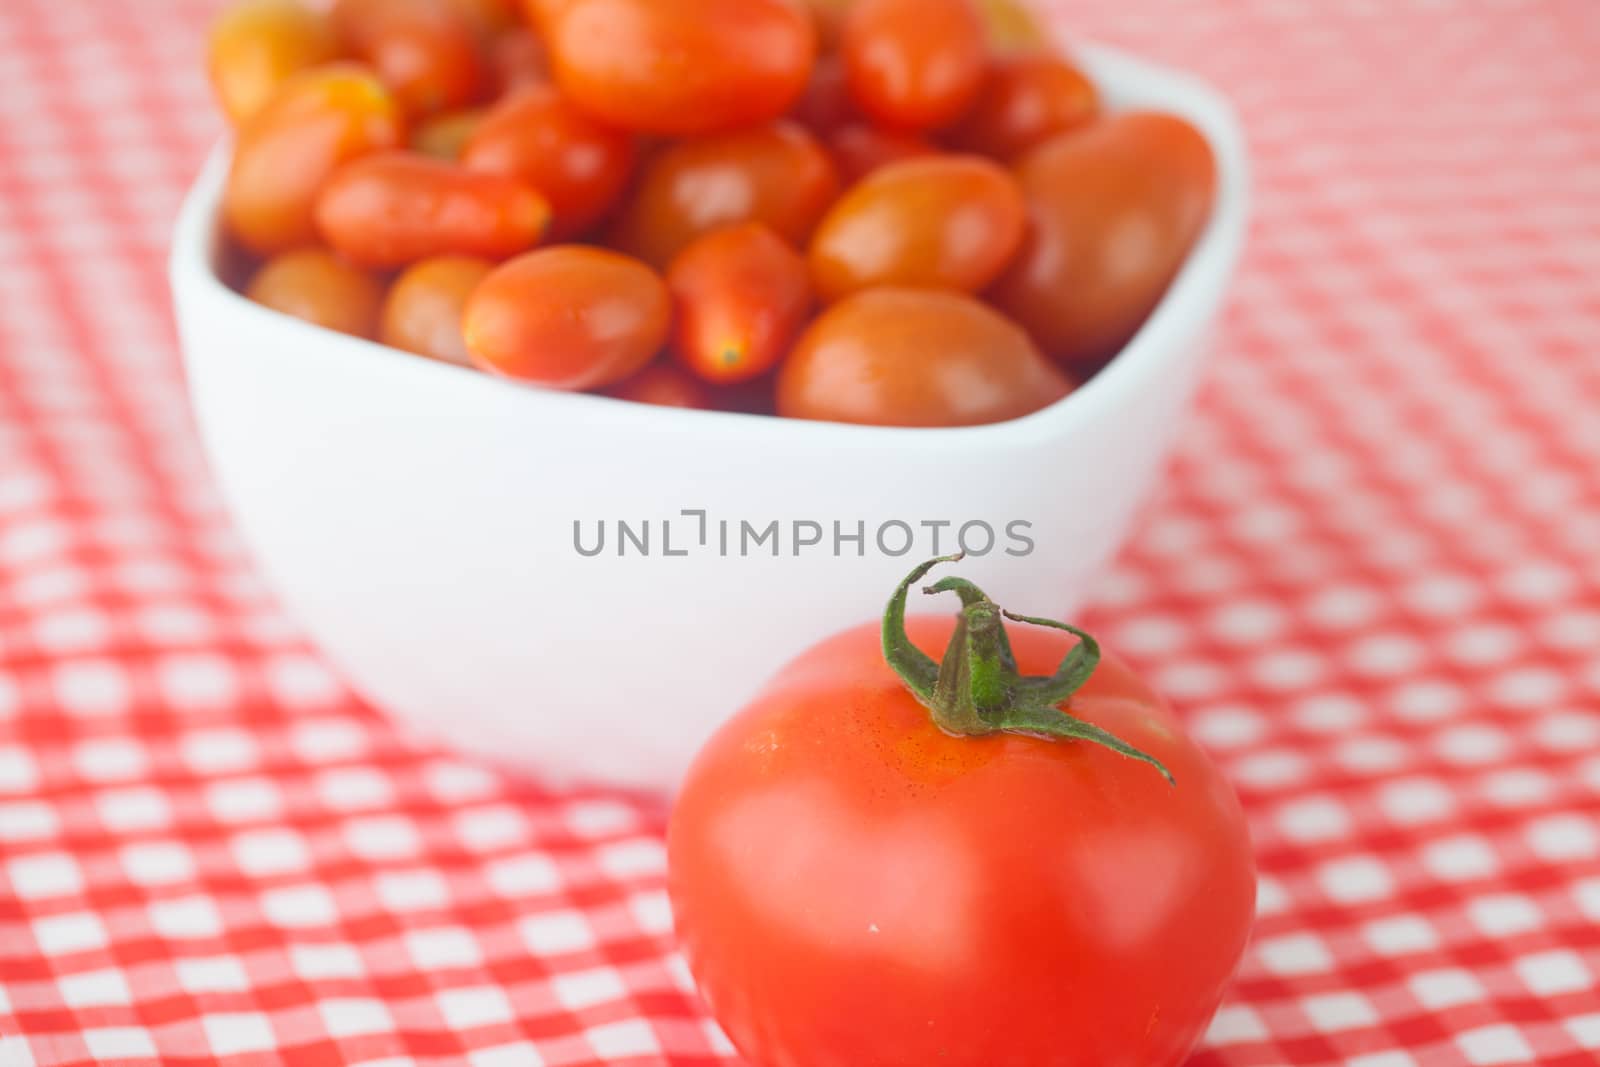 cherry tomatos and tomatos in bowl on checkered fabric by jannyjus